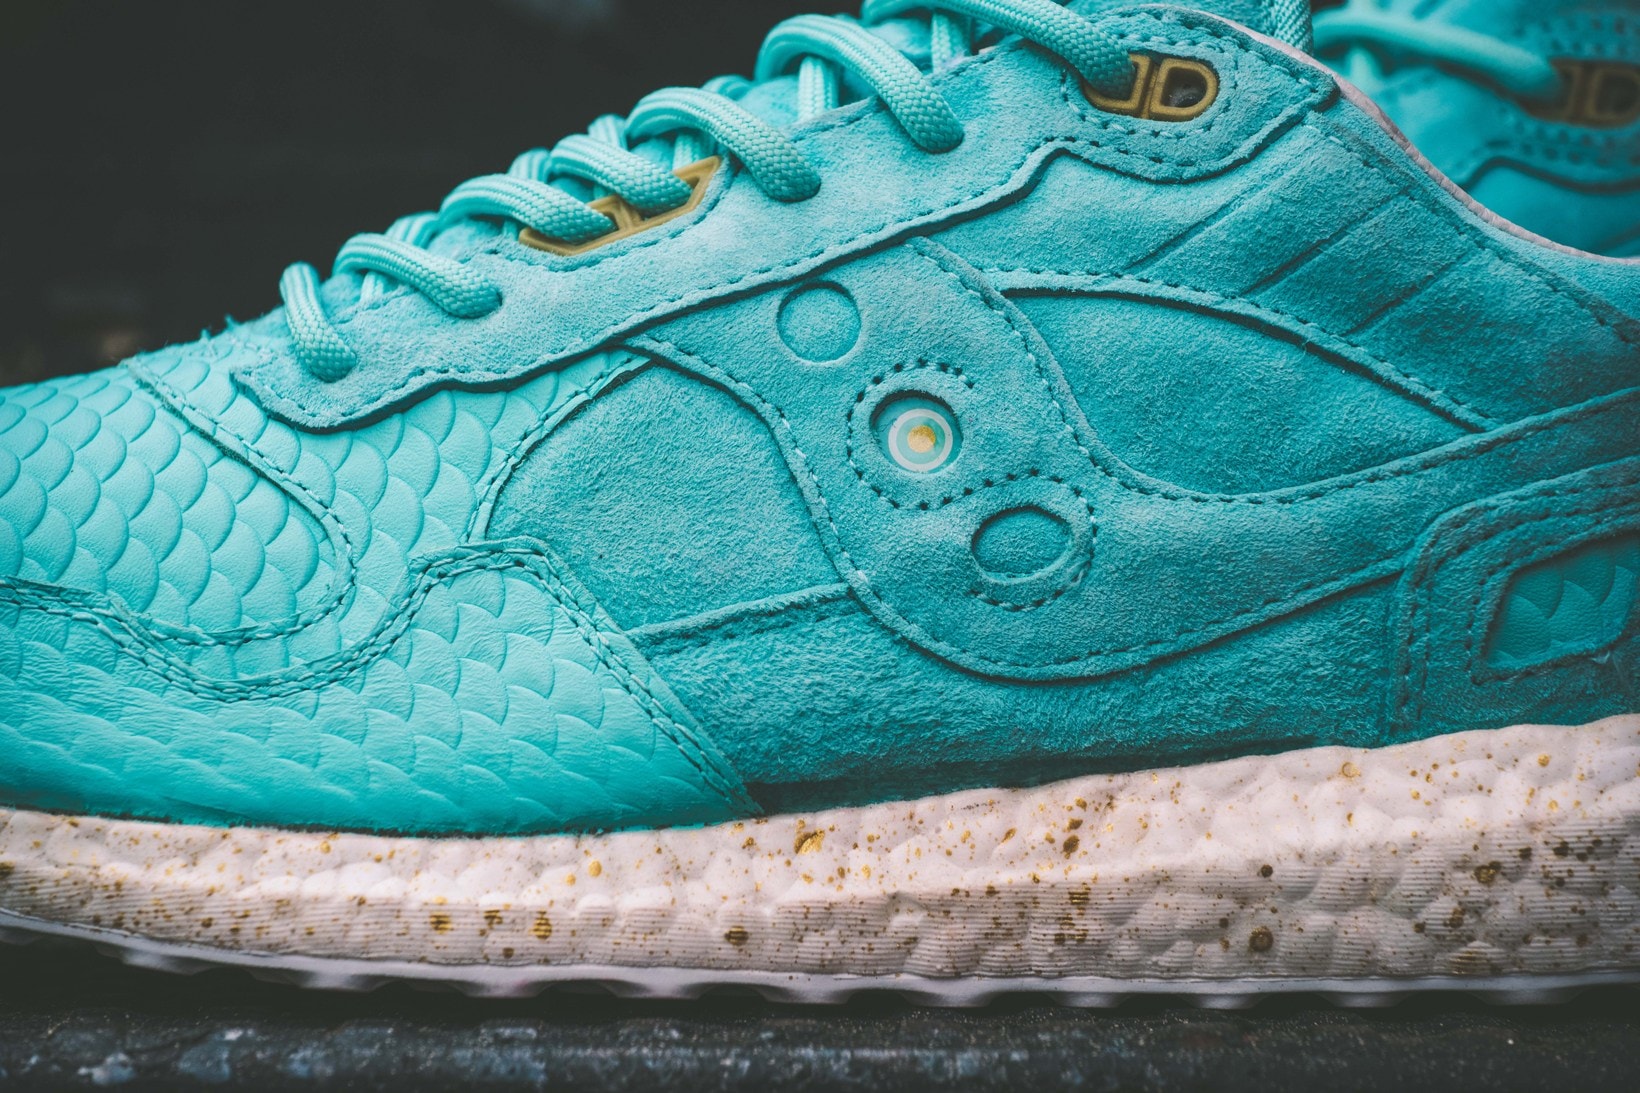 Saucony Shadow 5000 “Righteous One” UltraBOOST Sole